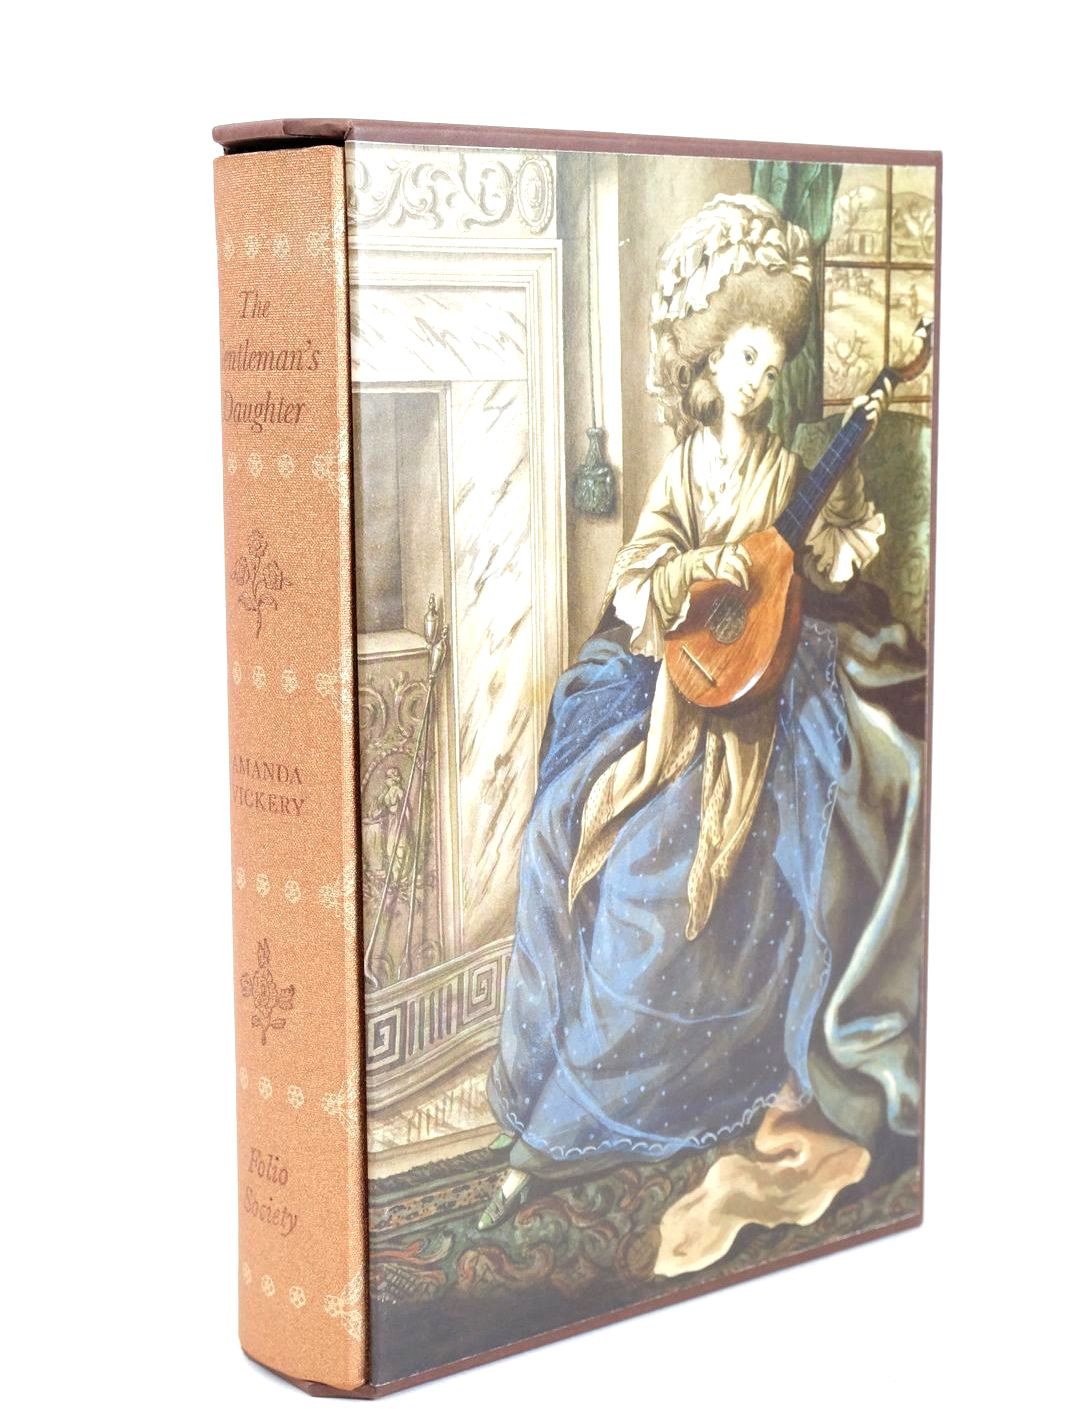 Photo of THE GENTLEMAN'S DAUGHTER written by Vickery, Amanda published by Folio Society (STOCK CODE: 1325721)  for sale by Stella & Rose's Books